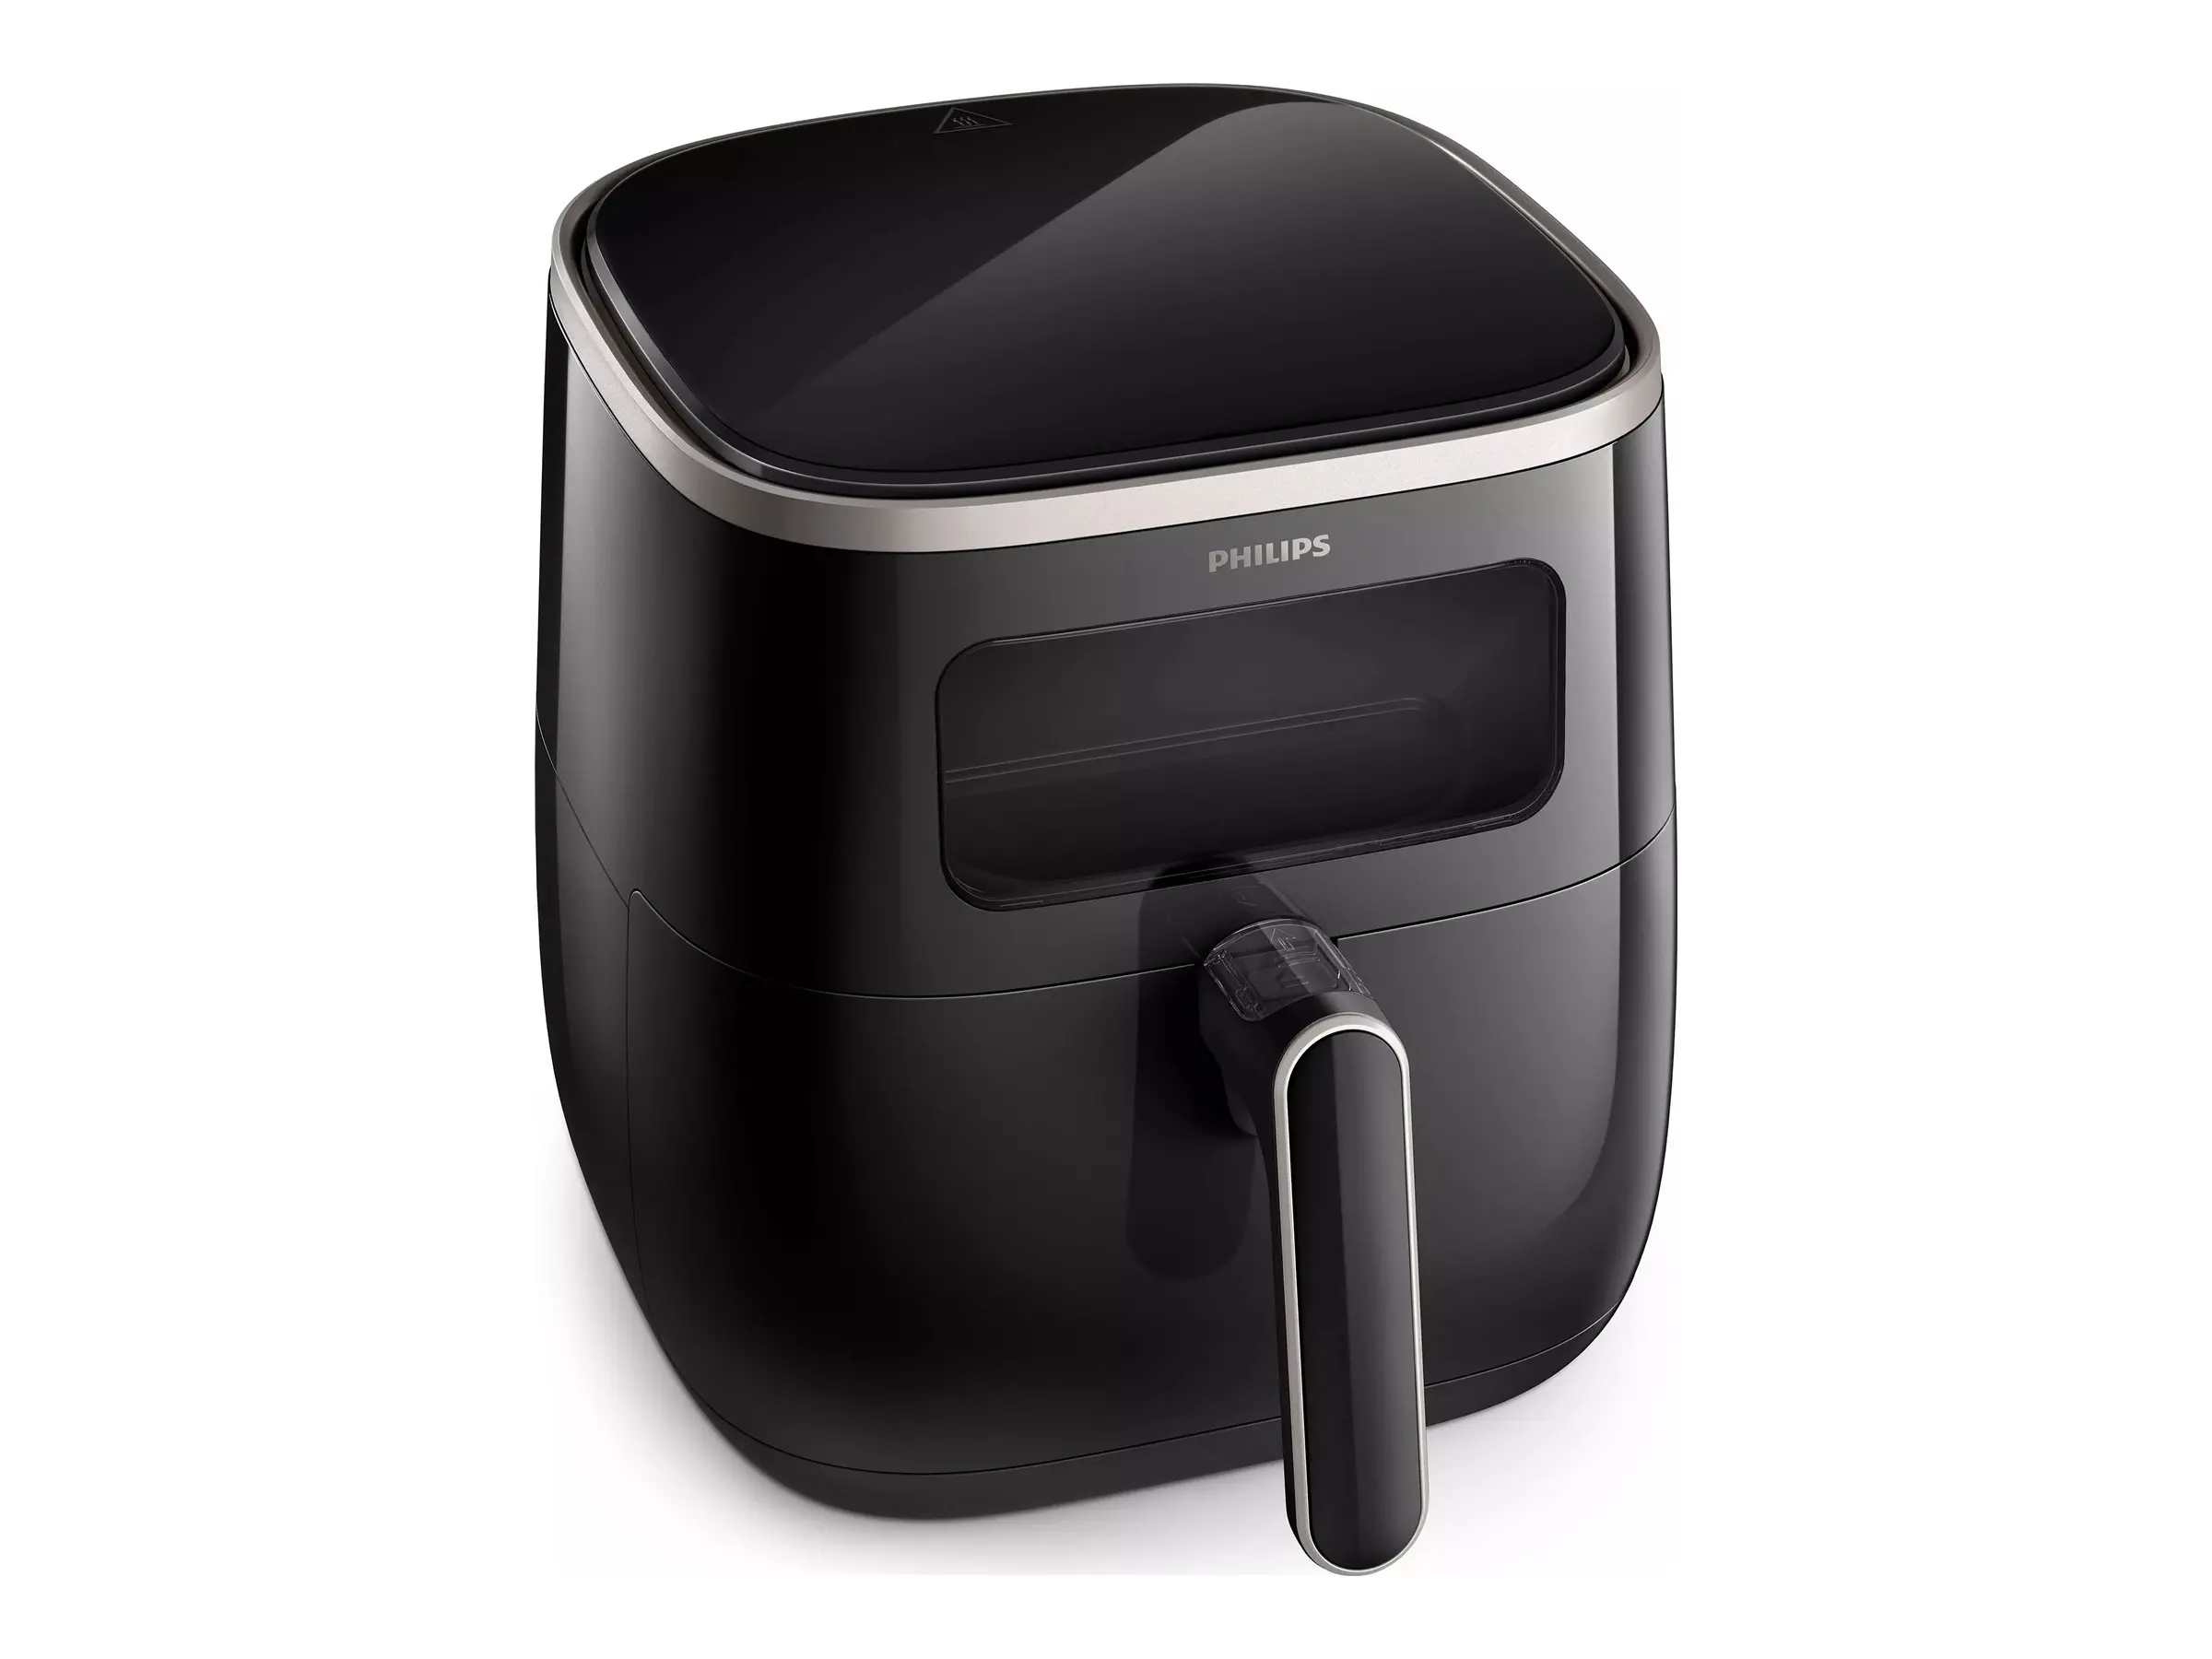 PHILIPS Airfryer 5.6L 1700W see though window NutriU App black - image 5